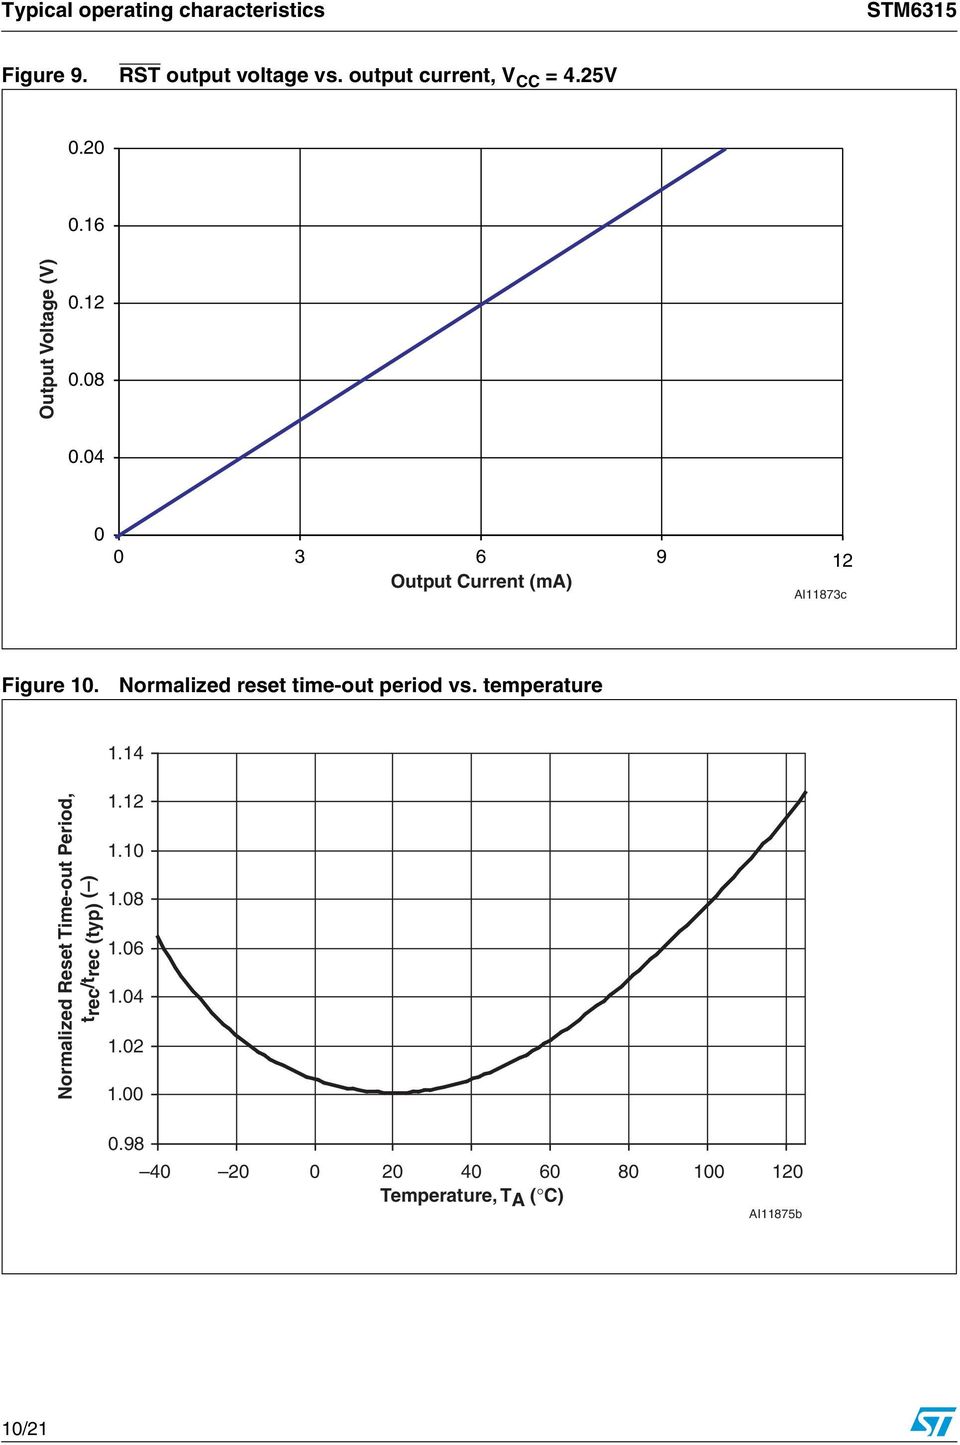 Normalized reset time-out period vs. temperature 1.